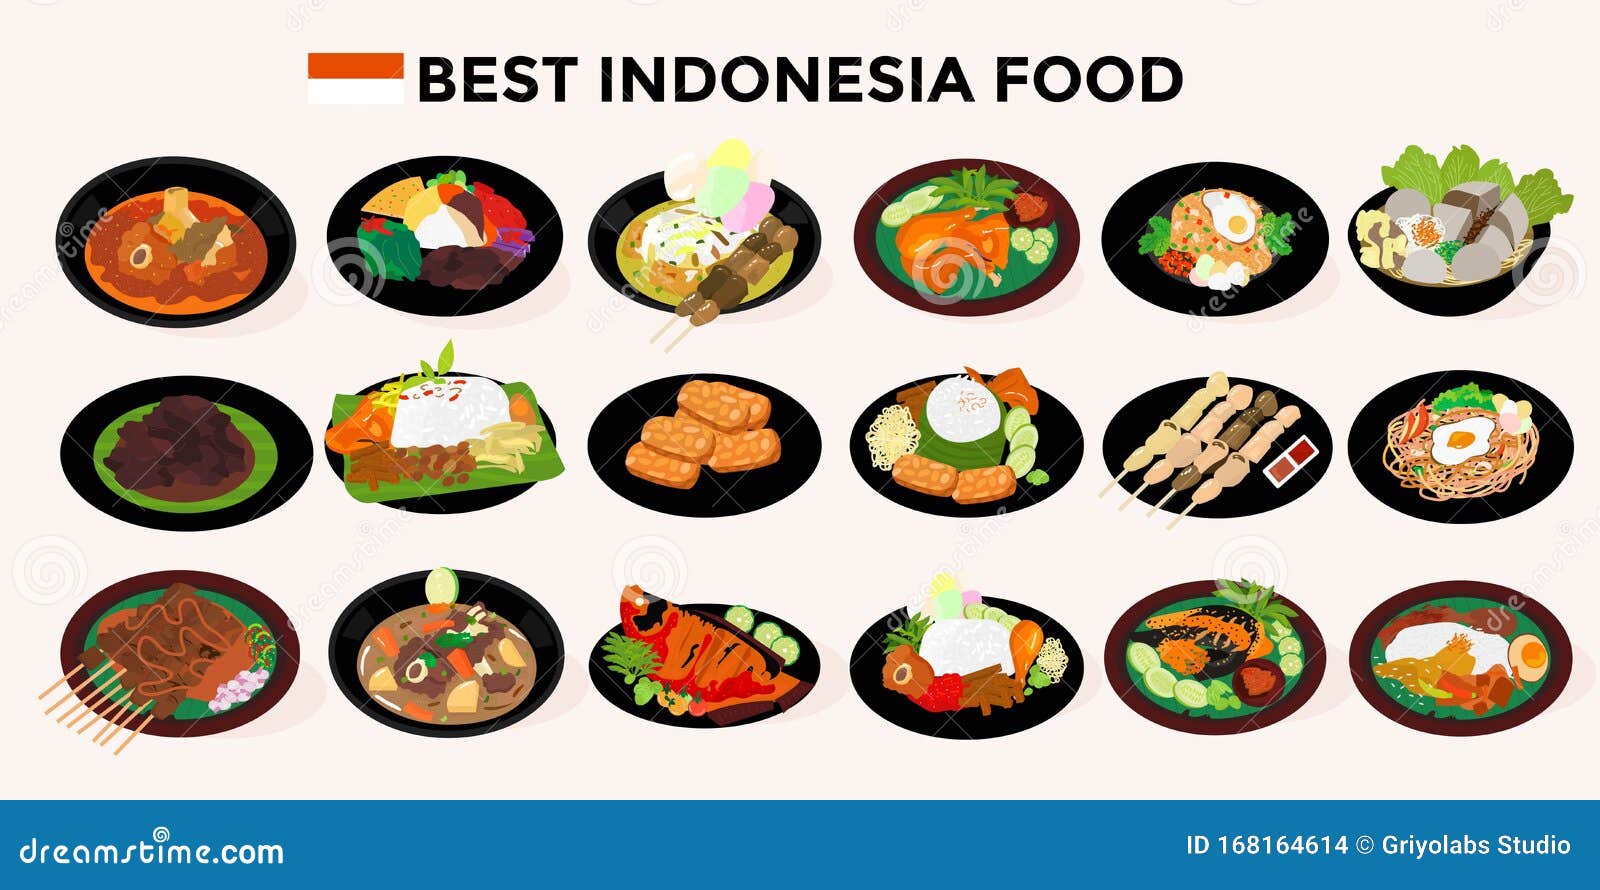 18 best special indonesian food culinary collection.   